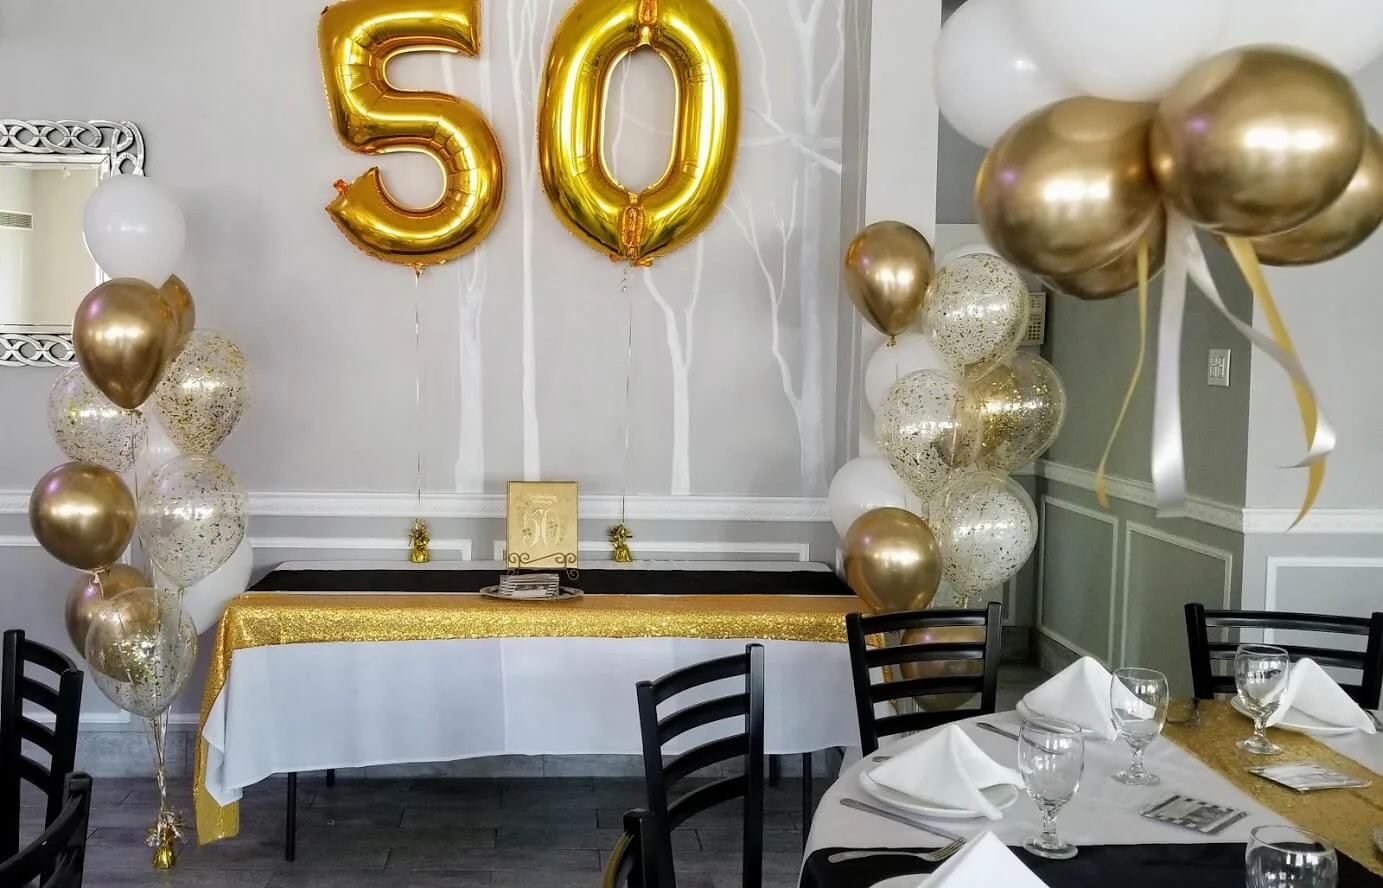 Gold and white latex balloons with confetti and large 50 Number balloon for a 50th celebration.